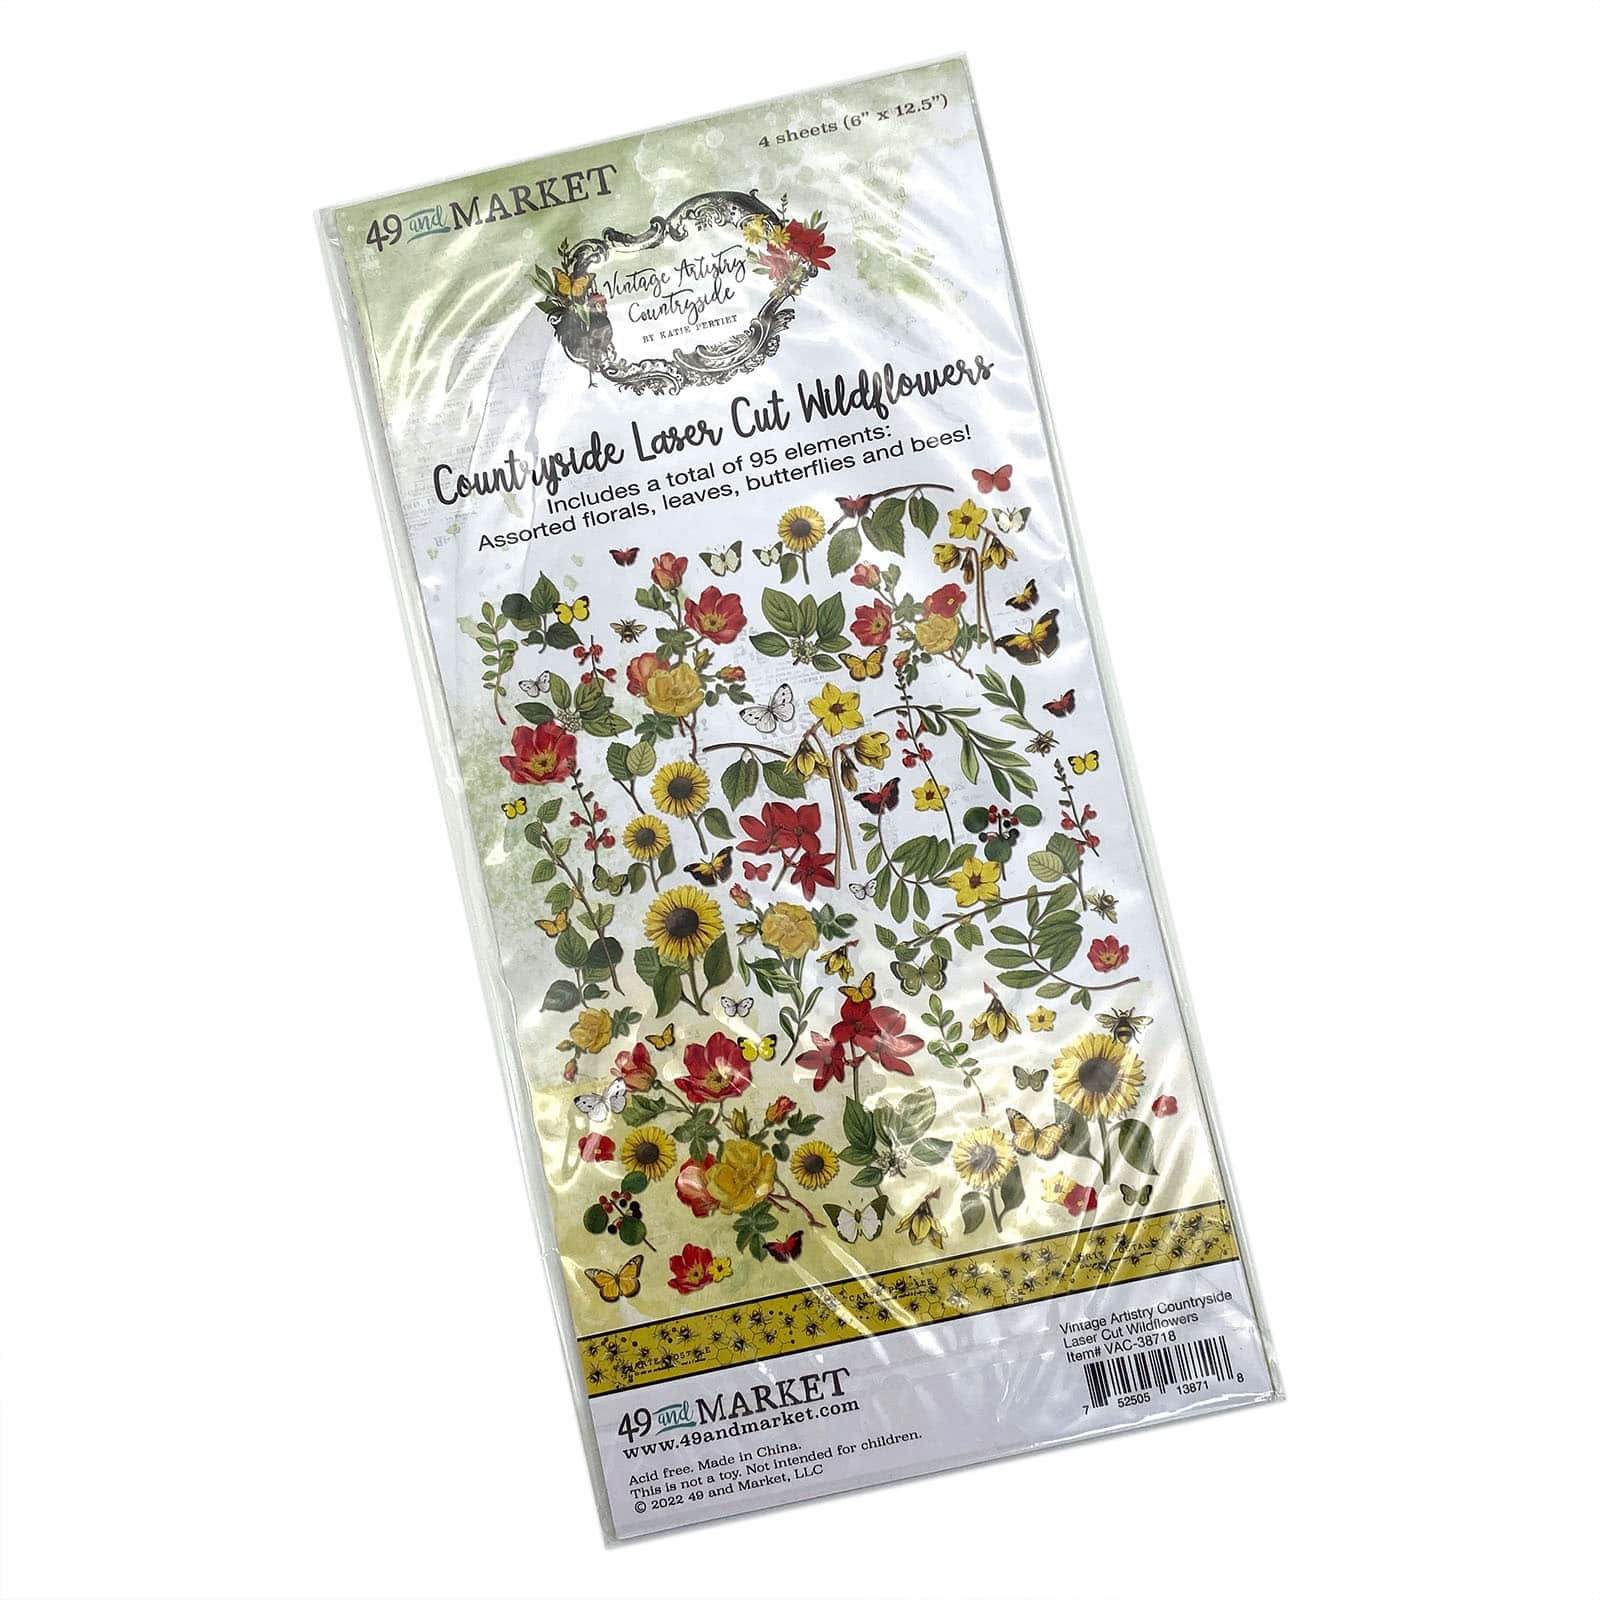 49 And Market Vintage Artistry Countryside Laser Cut Out Wildflowers